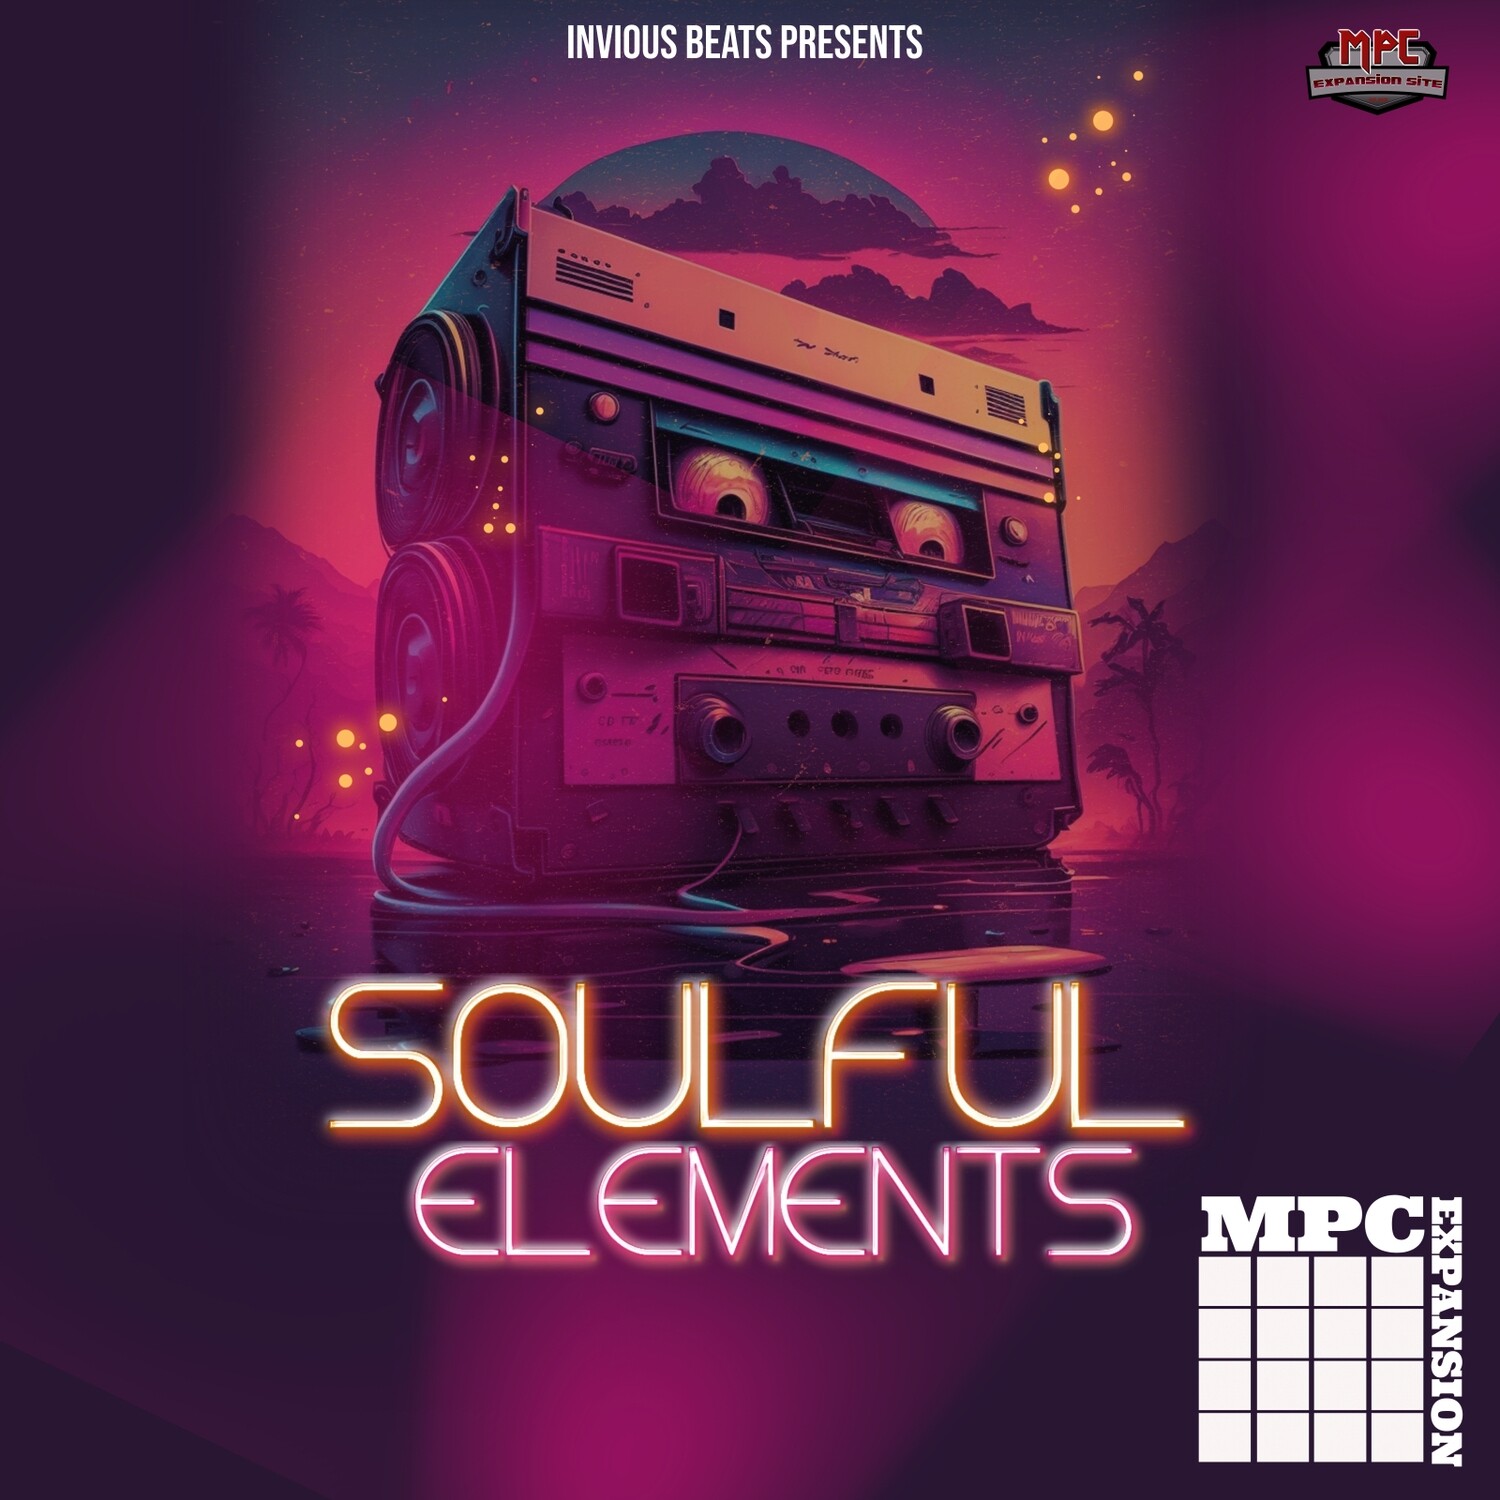 MPC EXPANSION 'SOULFUL ELEMENTS + FREE SOUL DRUMMER' by INVIOUS